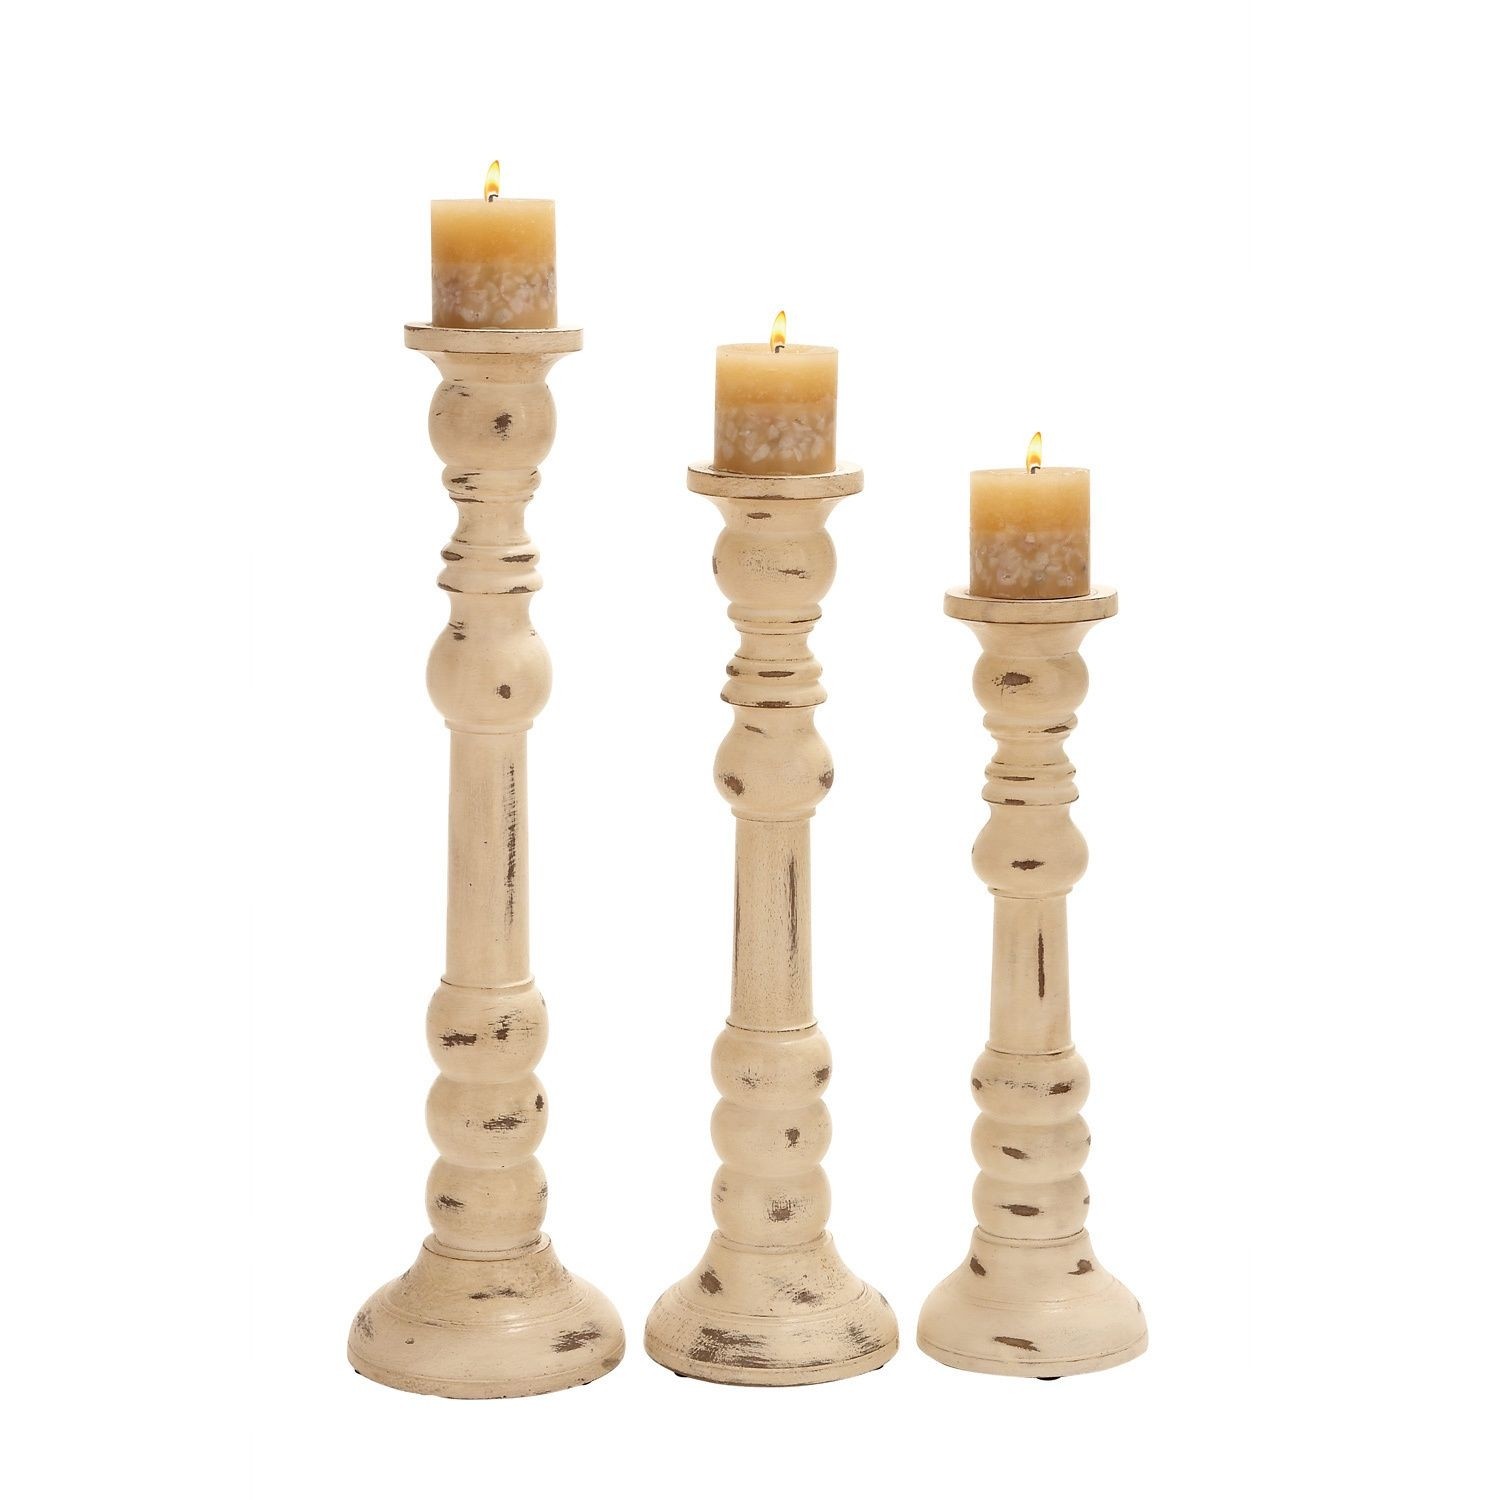 Candle stands wood candle holder set 3 antiqued wood candle